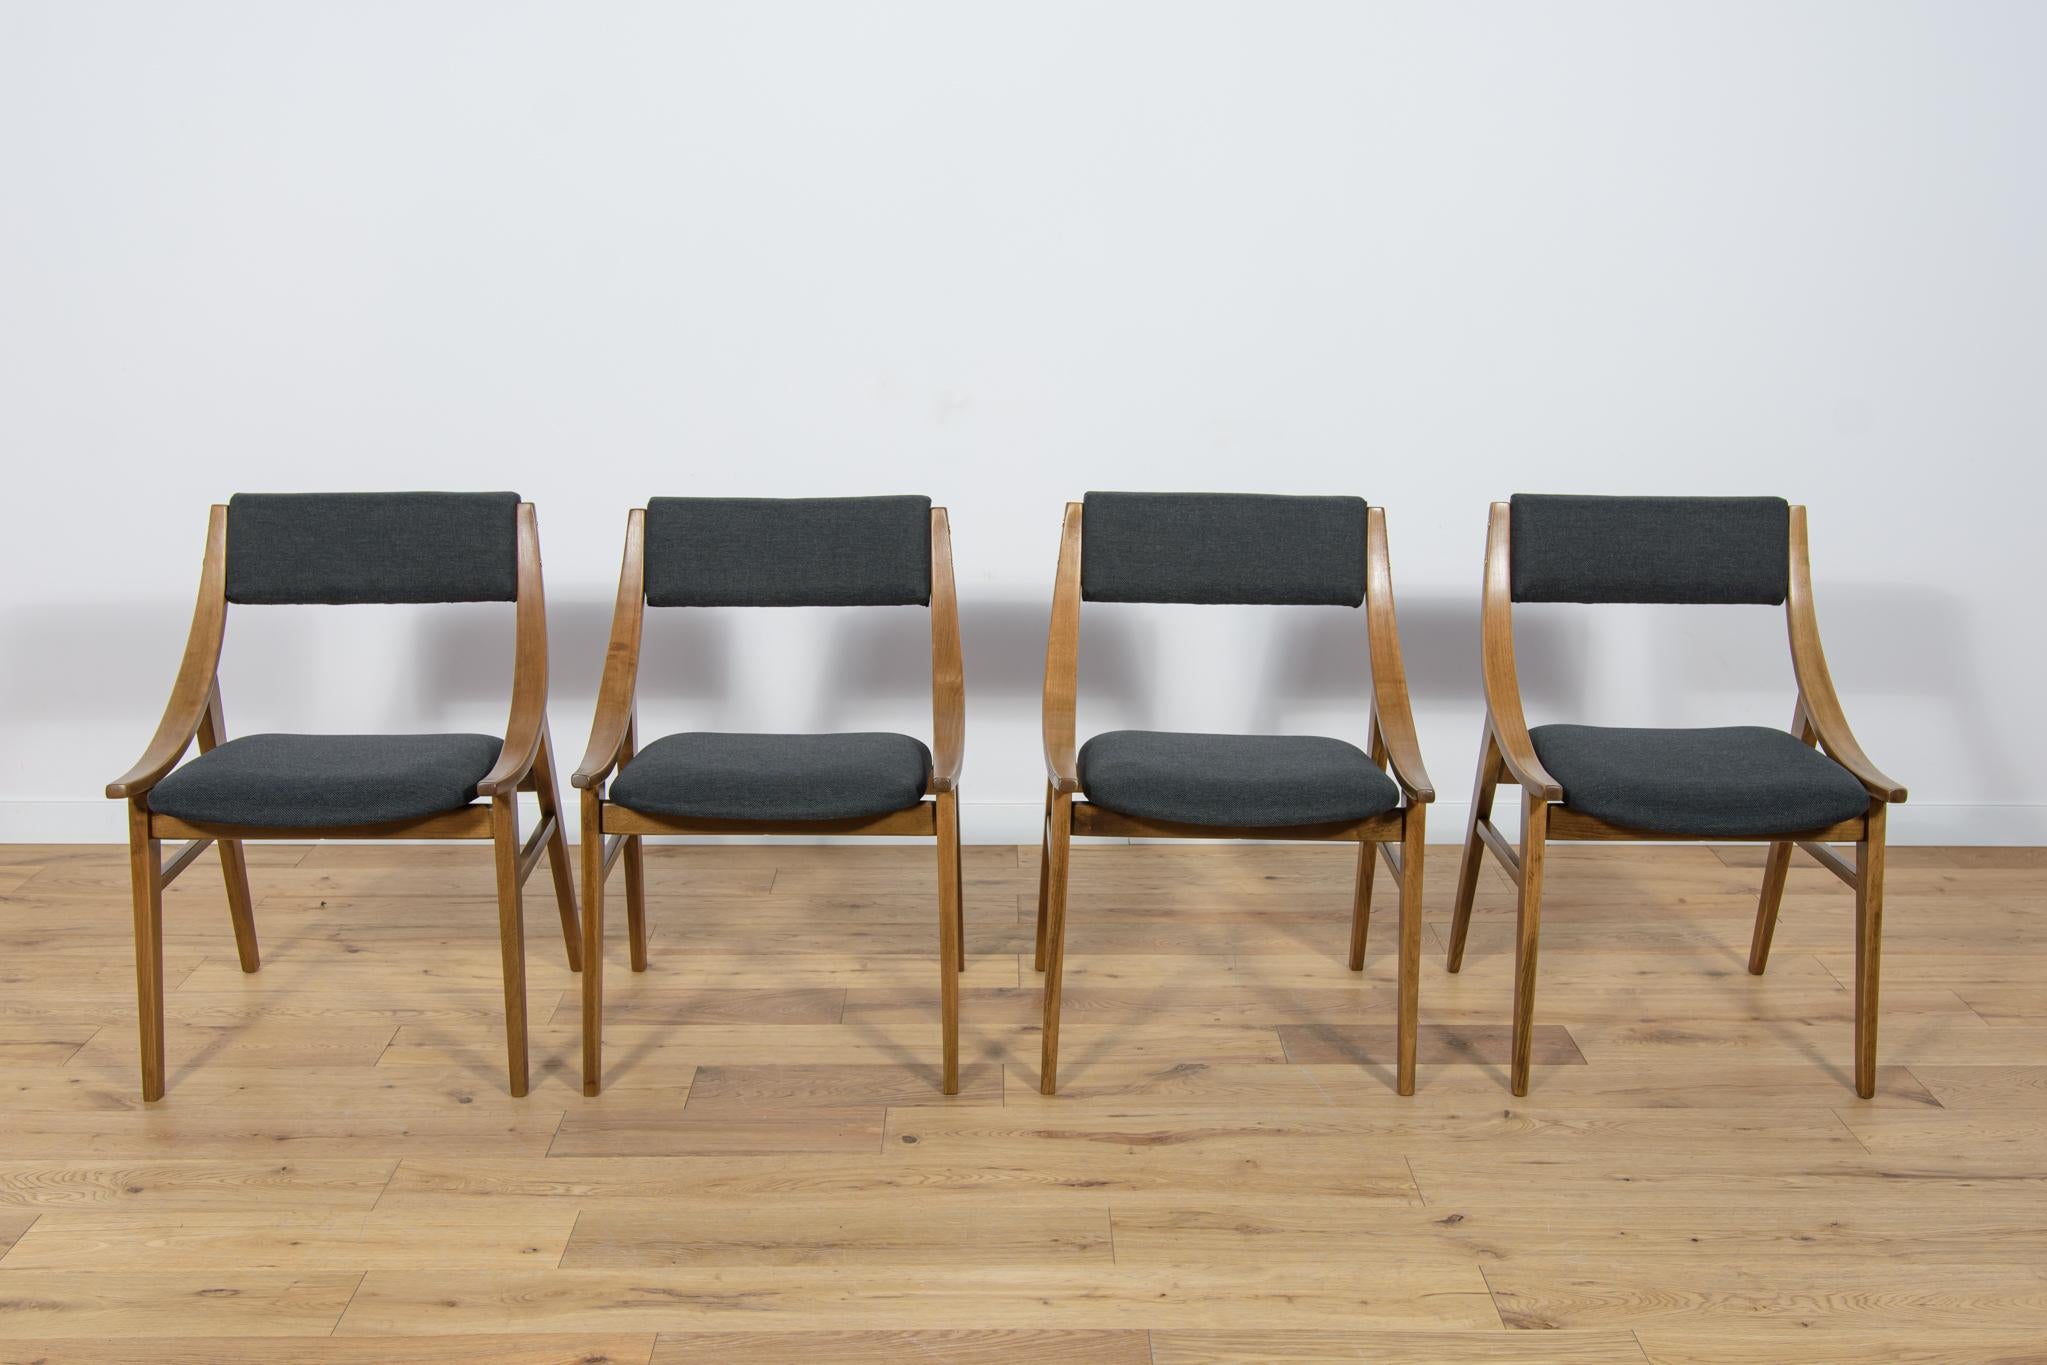 
This set of four dining chairs was produced by Zamojska Furniture Factory in Poland circa 1970. It was designed by Juliusz Kędziorek. Completely restored. The sponges have been replaced. The seats have been reupholstered with new black fabric. The